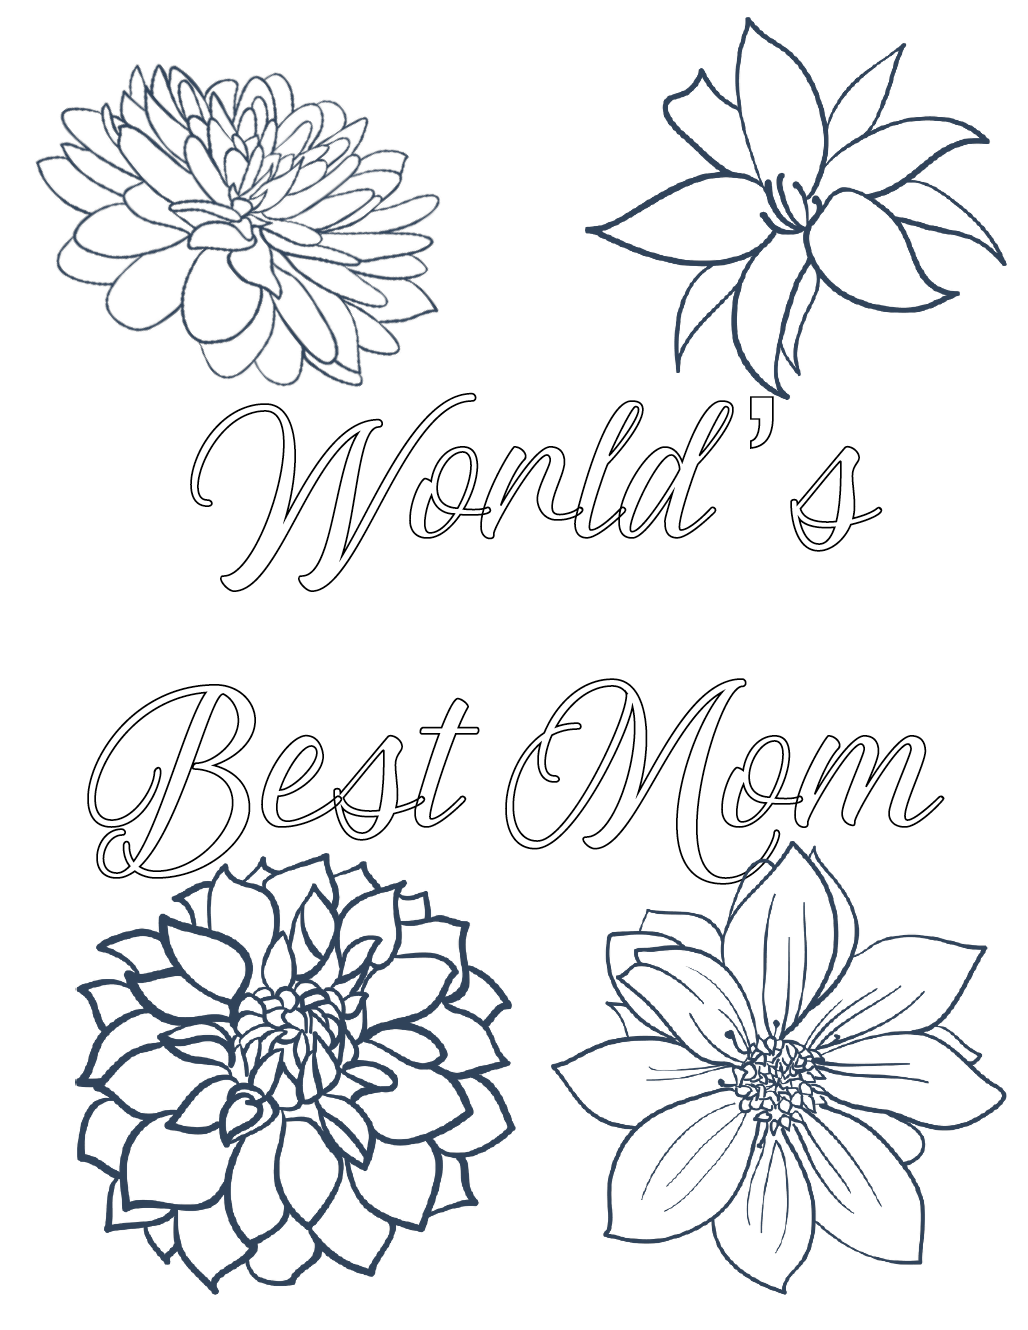 Download Free Printable Mother's Day Coloring Pages: 4 Designs